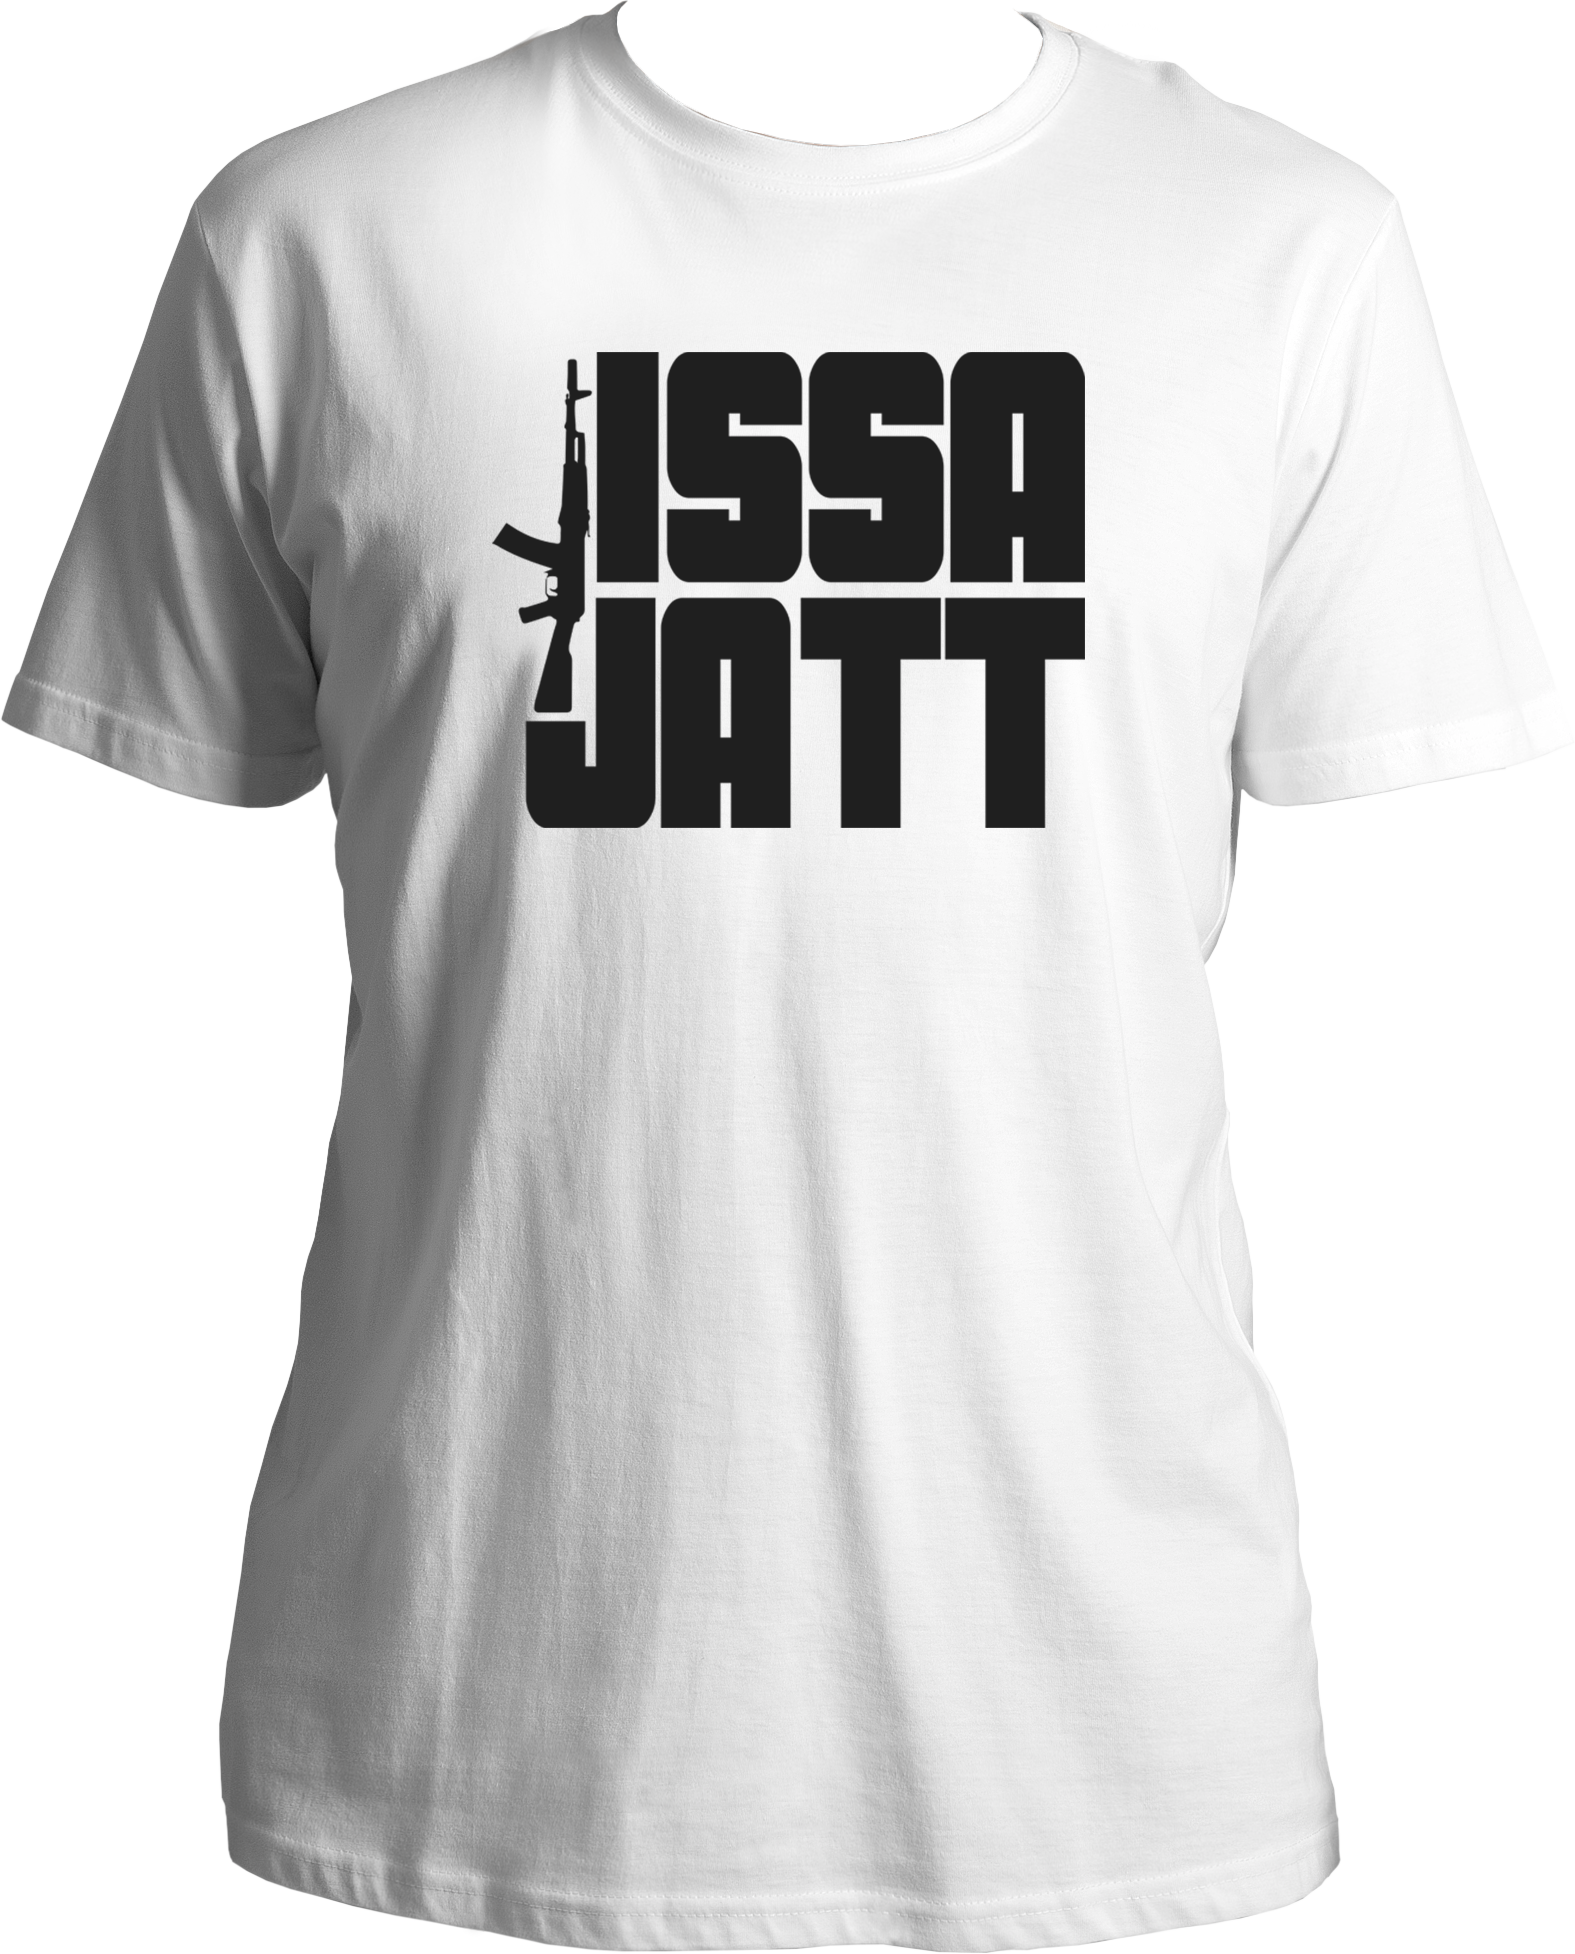 Step into the world of Moose Wala vibes with our exclusive "Issa Jatt" T-Shirt, echoing the spirit of Sidhu Moose Wala's powerful anthem. Crafted for fans who live and breathe the essence of Moose Wala's music.